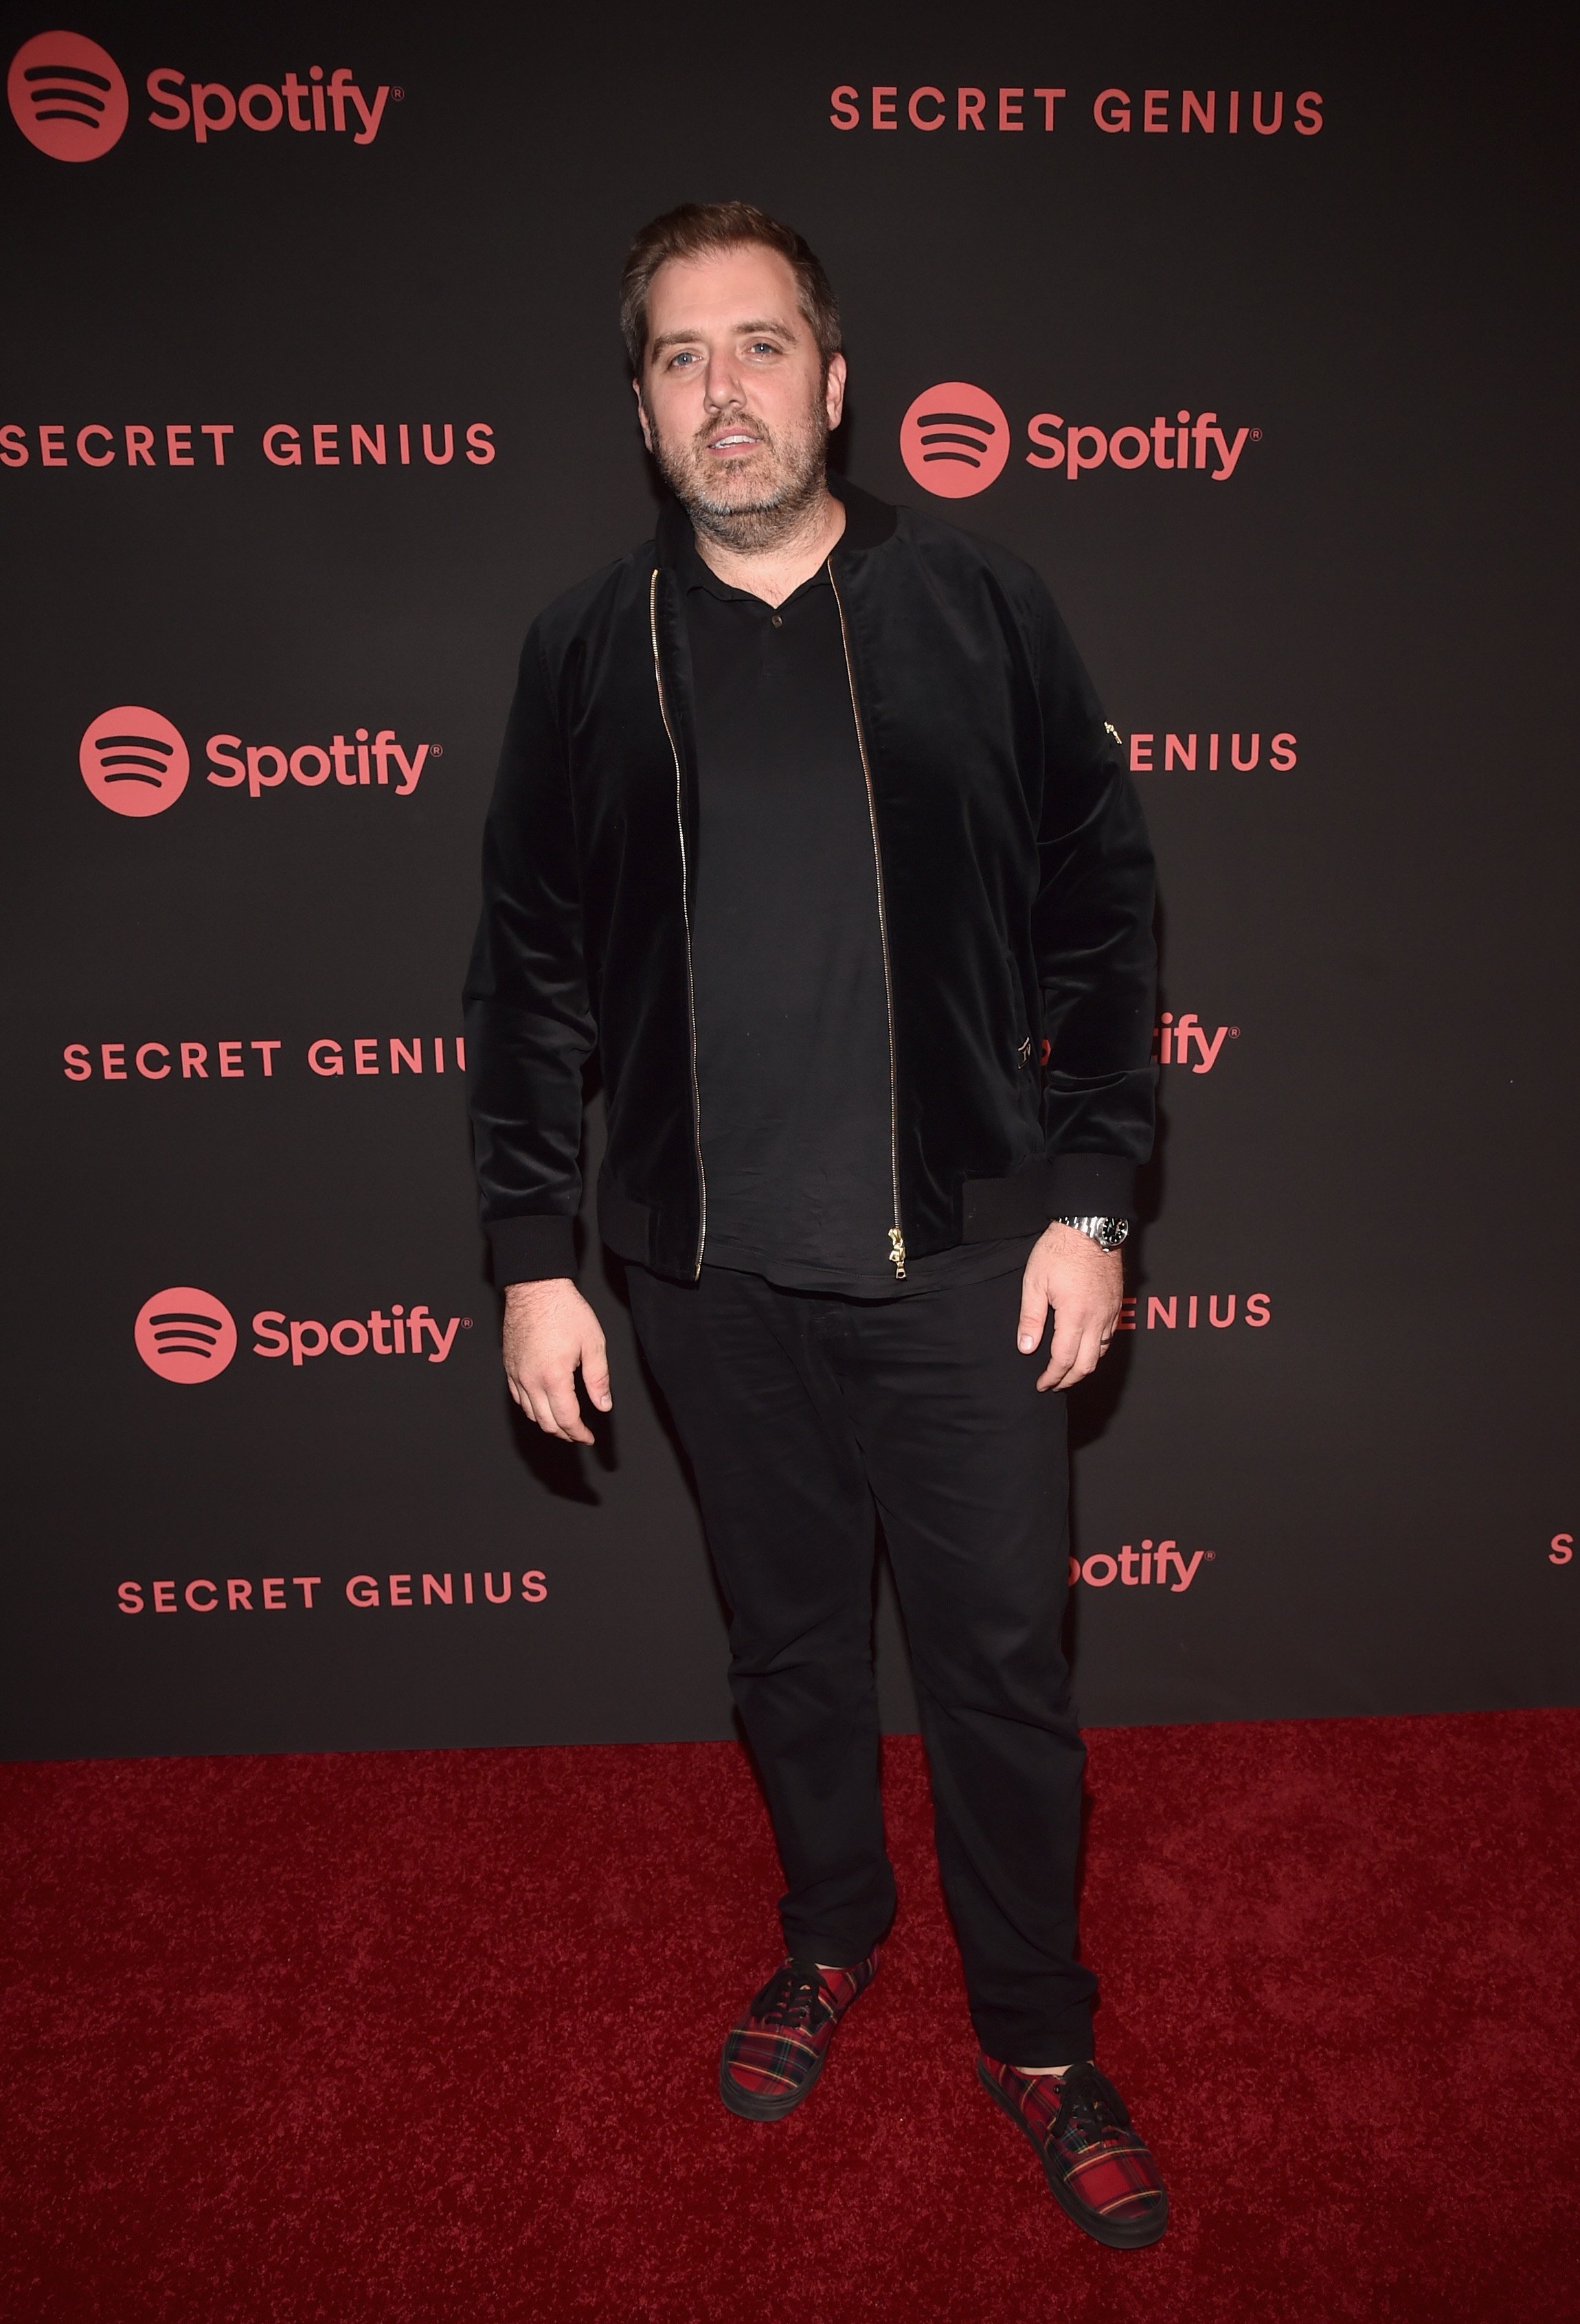 busbee attends Spotify's Secret Genius Awards hosted by NE-YO at The Theatre at Ace Hotel on November 16, 2018 in Los Angeles, California | Photo: Getty Images